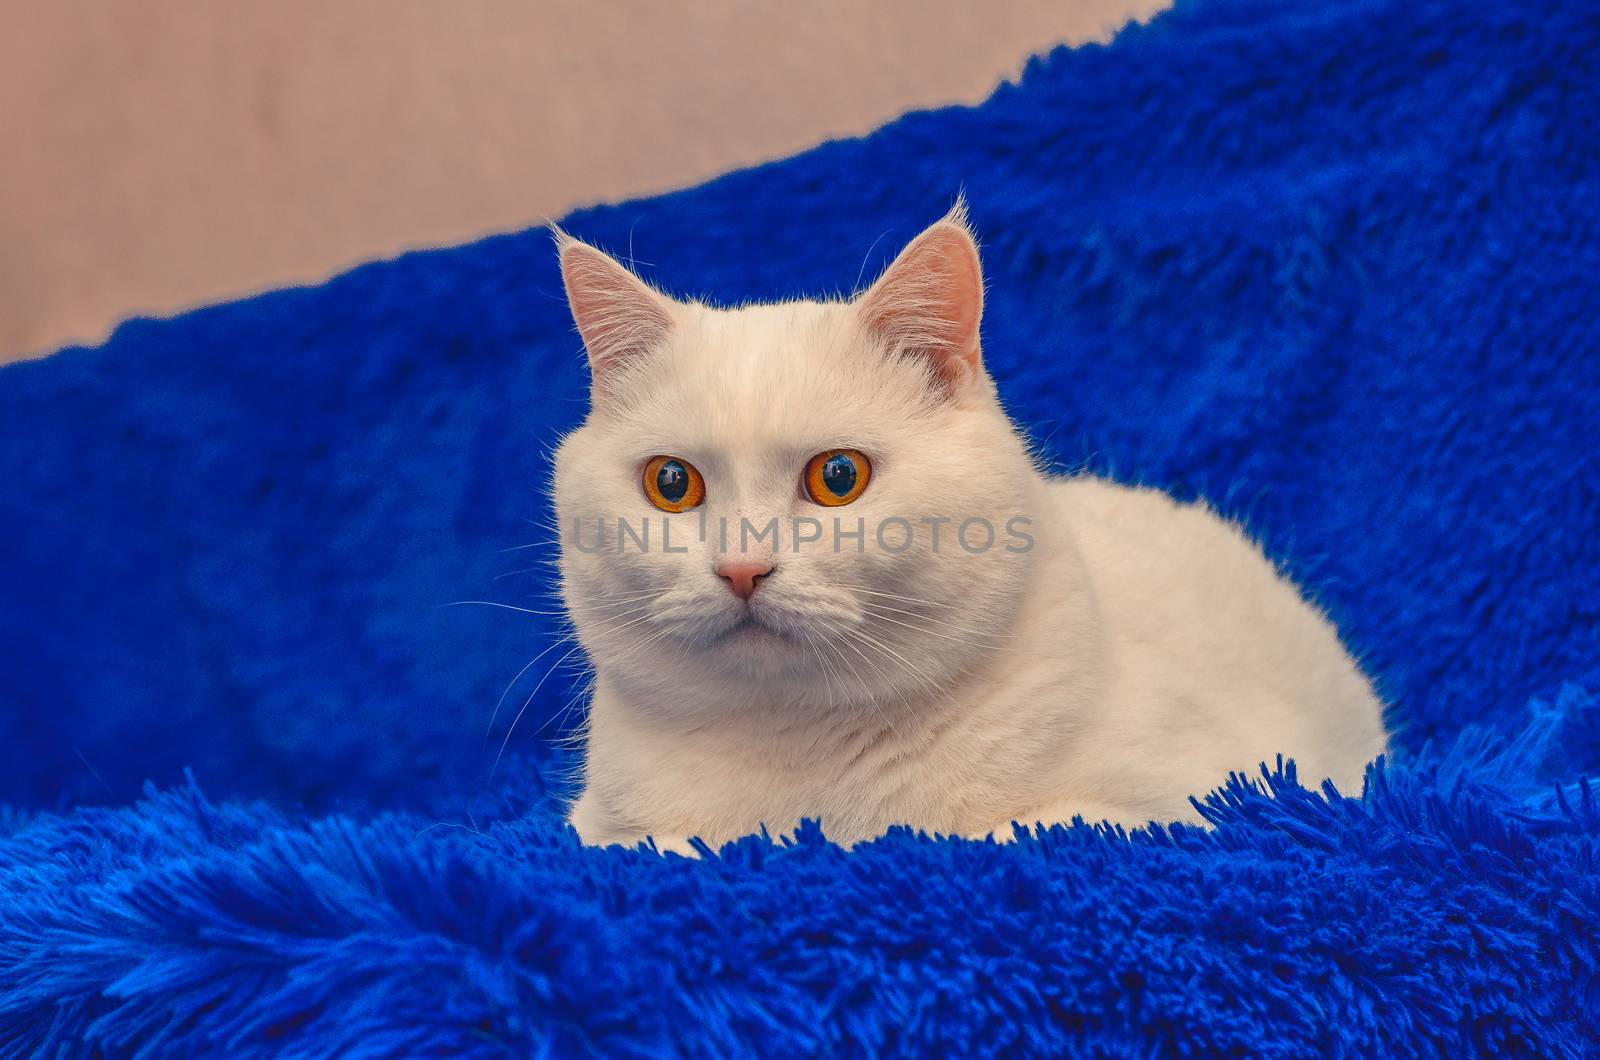 Beautiful White Cat with Yellow Eyes is sitting on a blue fluffy bedspread by chernobrovin